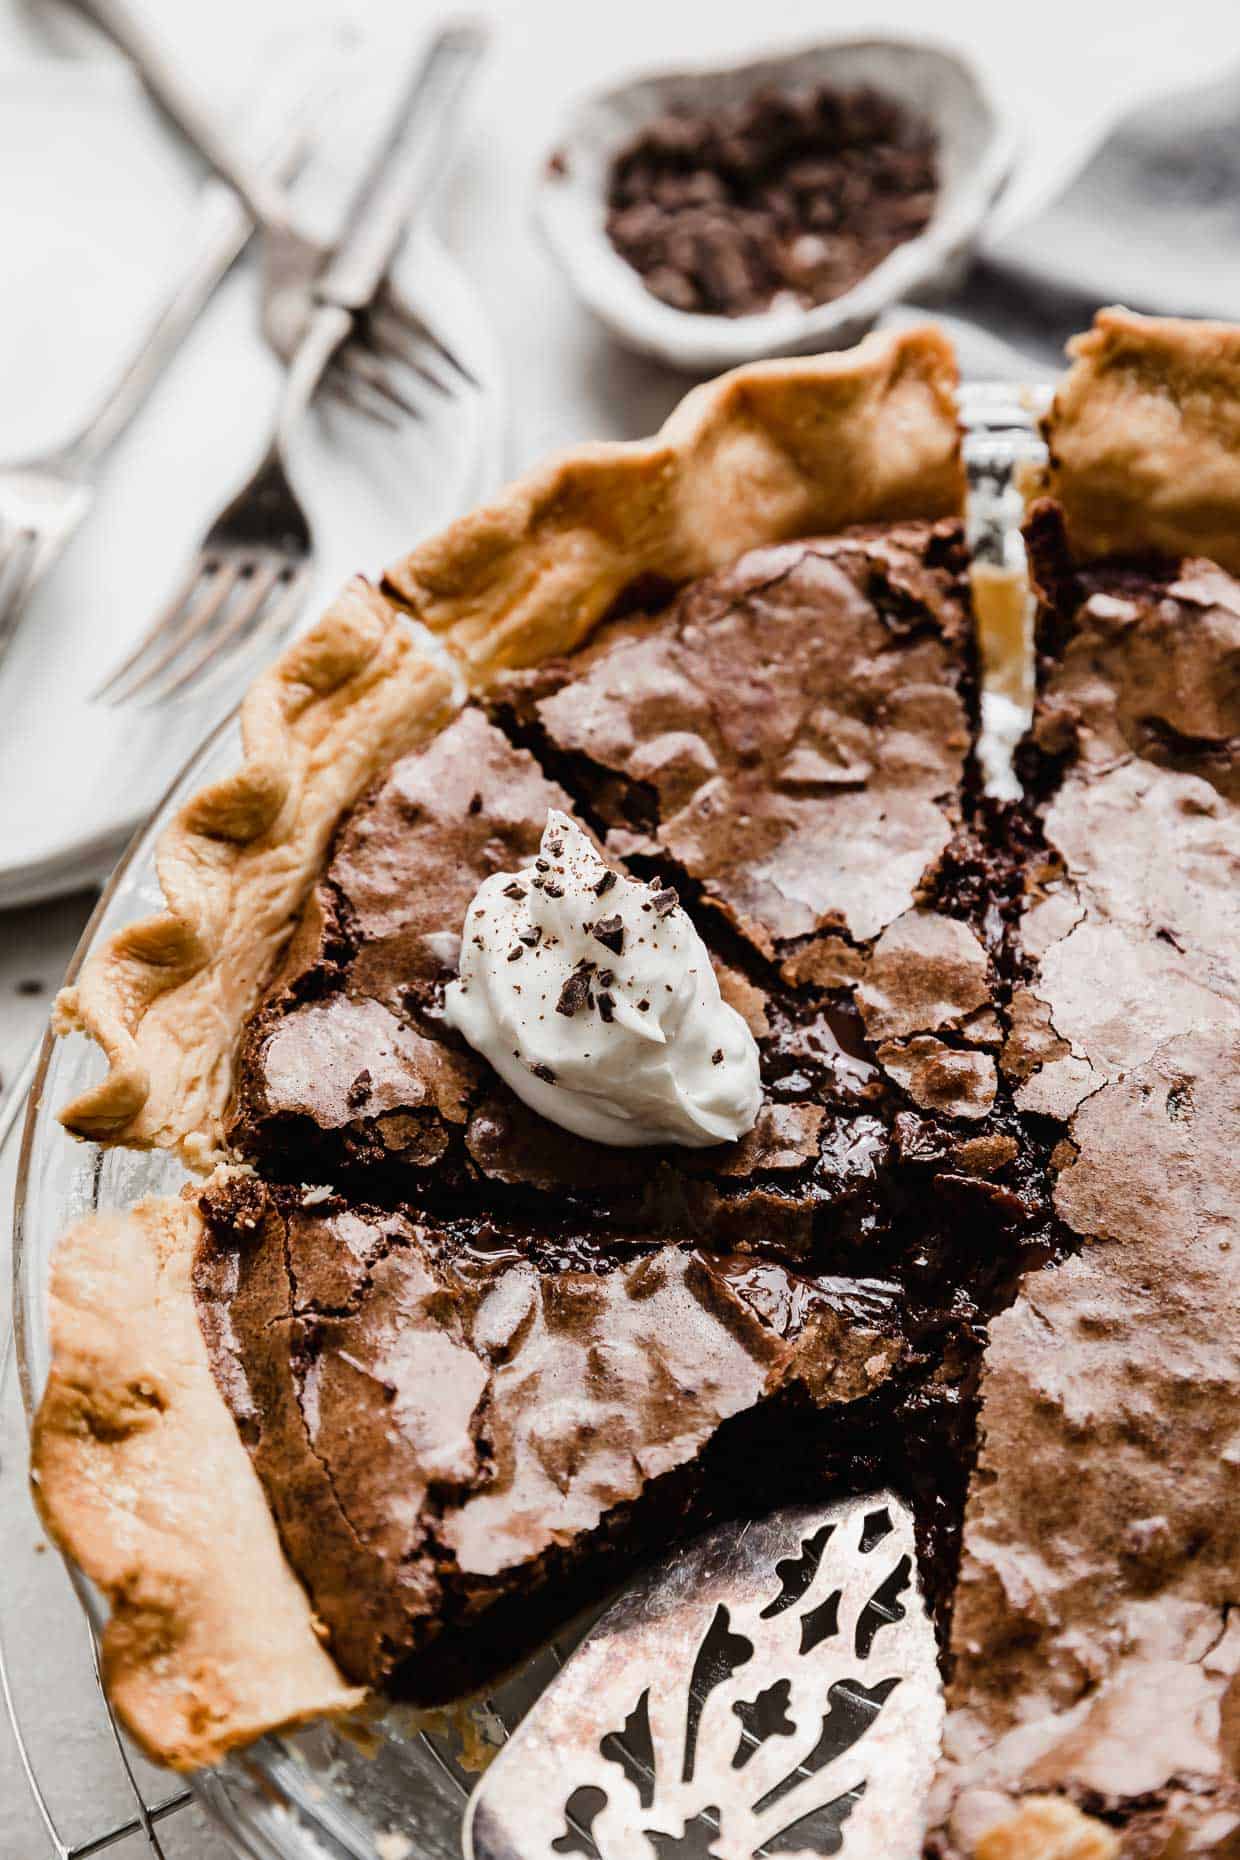 A Brownie Pie cut into slices, with one slice topped with white whipped cream and chocolate shavings.